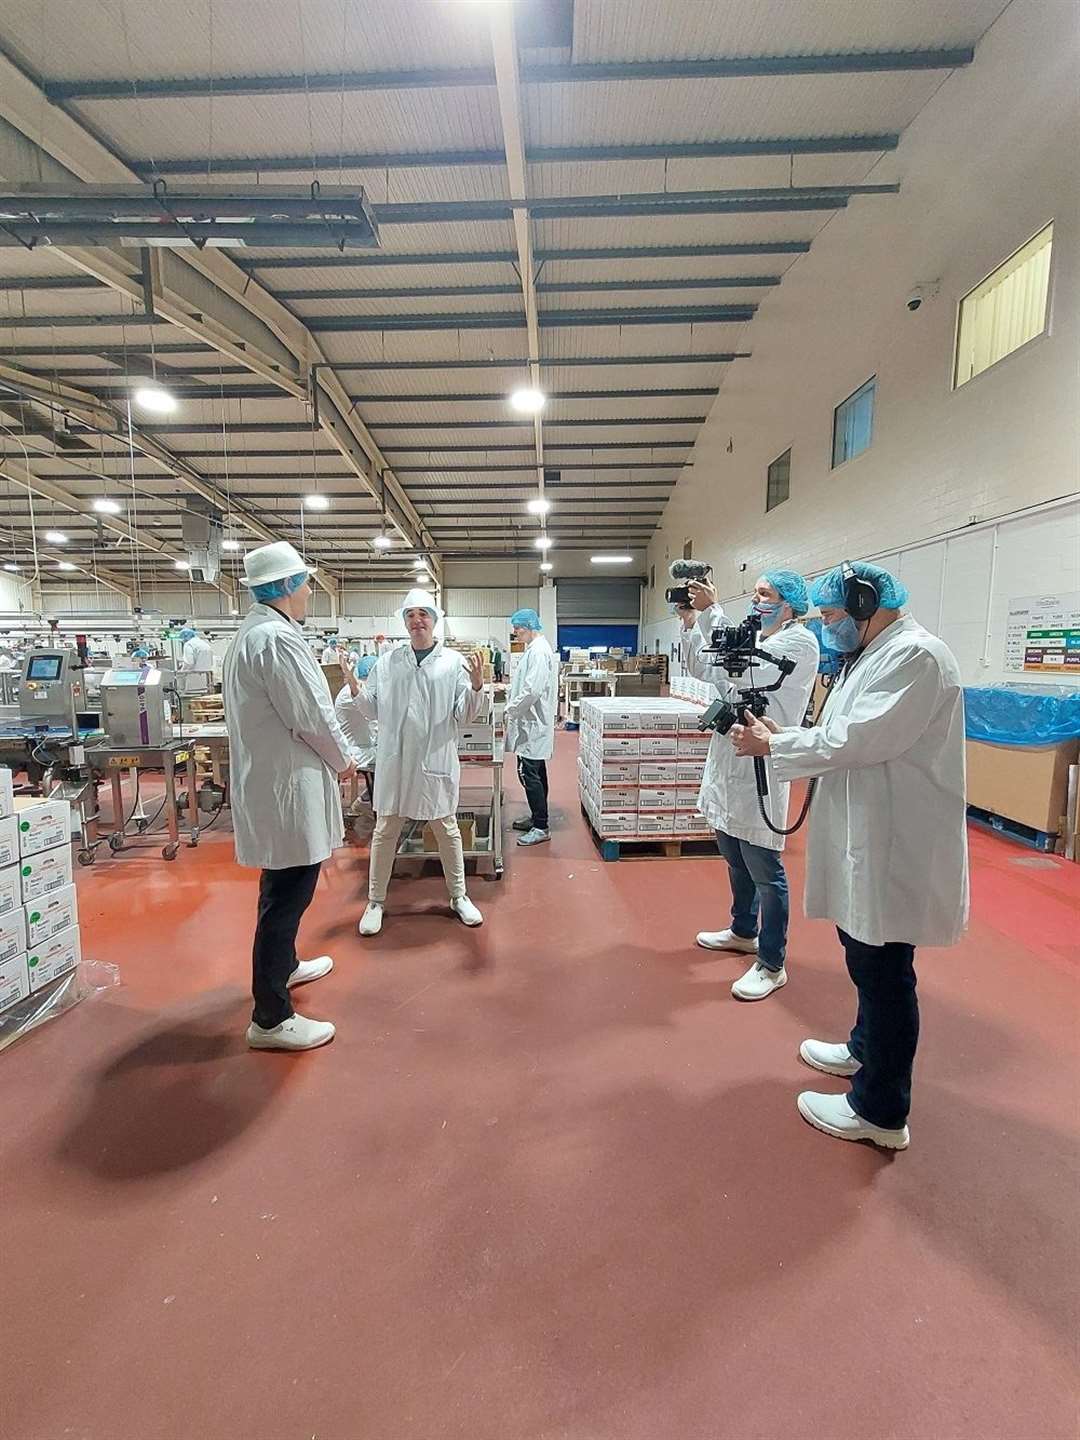 ITV filming within the factory.